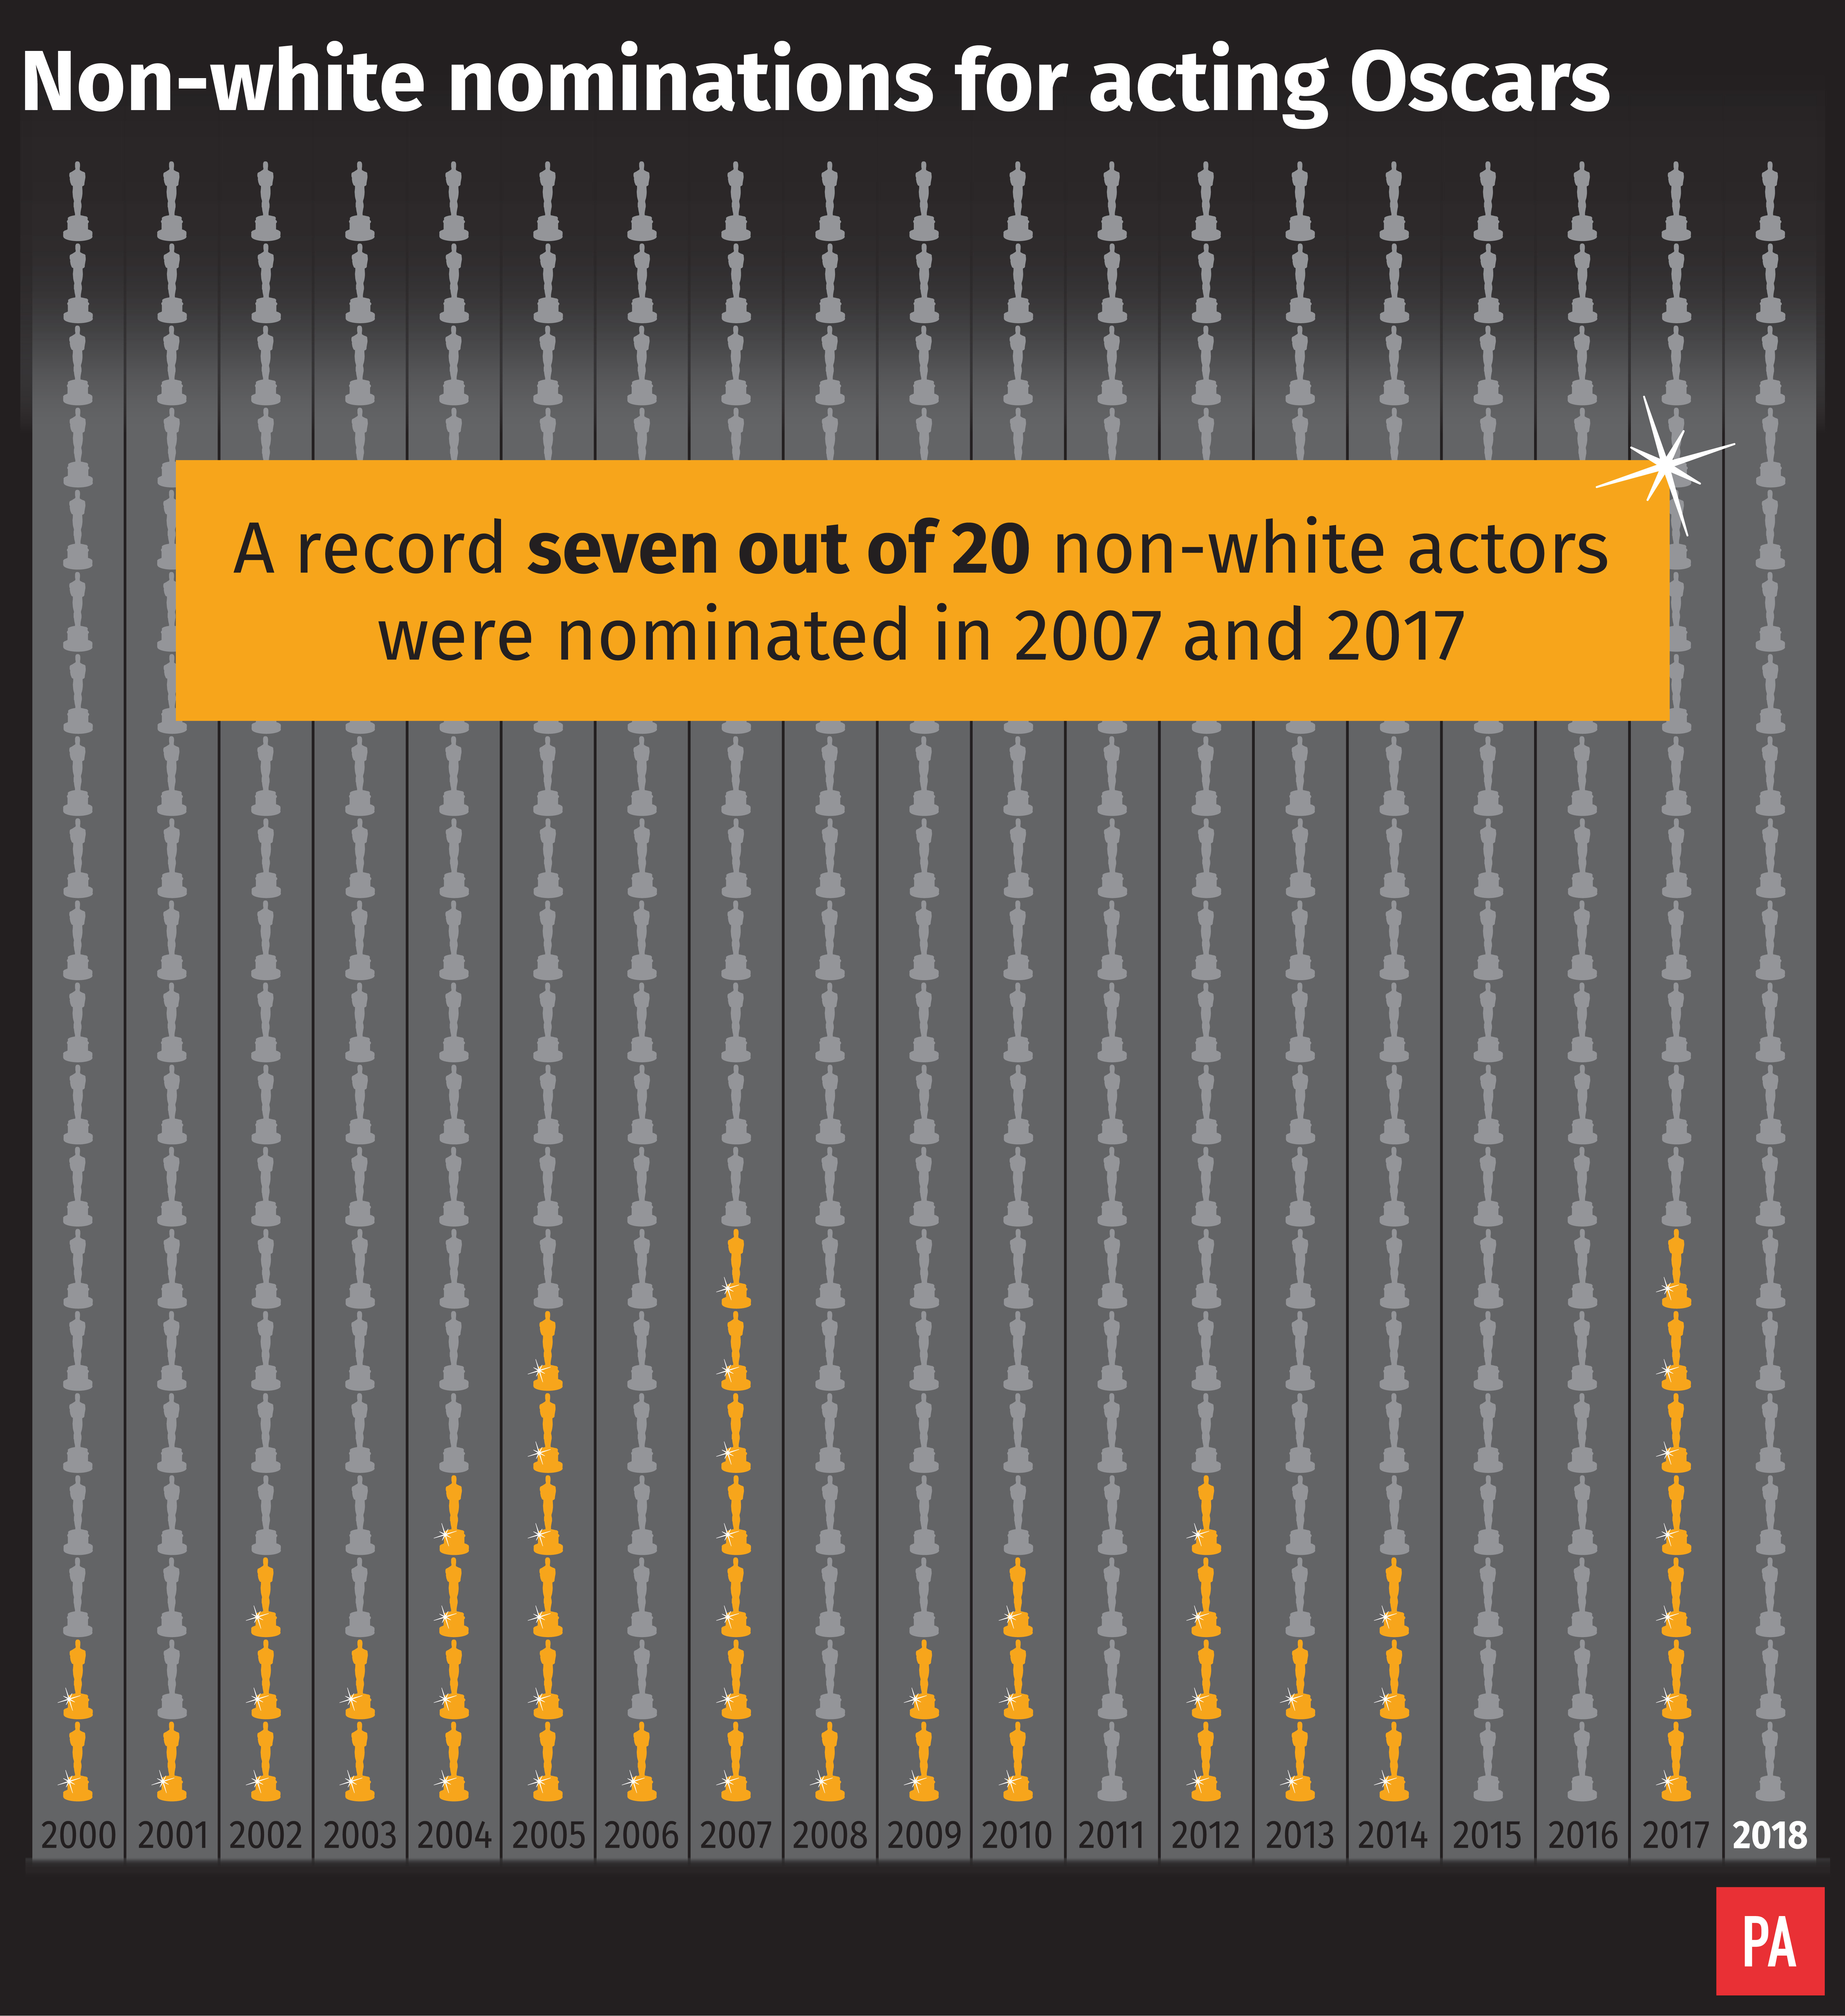 Non-white nominations for acting Oscars